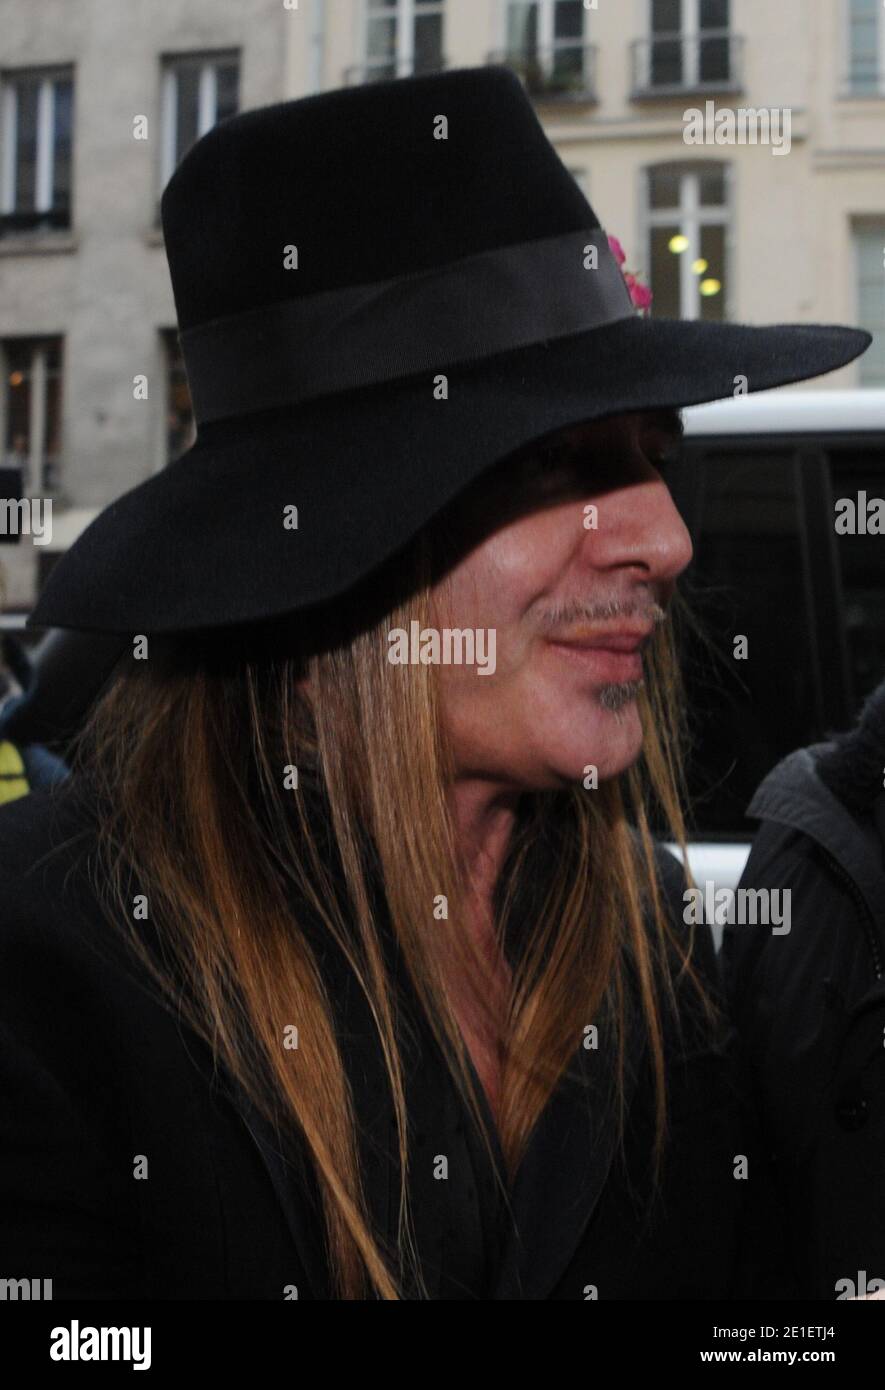 John Galliano is seen arriving at the 3rd arrondissement precinct where he should be confronted with a couple accusing him of anti-Semitic comments in Paris, France on February, 28, 2011. John Galliano, the chief designer at Christian Dior since 1996, has been suspended from his duties at the fashion house after he was arrested for allegedly assaulting a woman and making anti-Semitic remarks at an outdoor Paris cafe 'La Perle'. Photo by Mousse/ABACAPRESS.COM Stock Photo